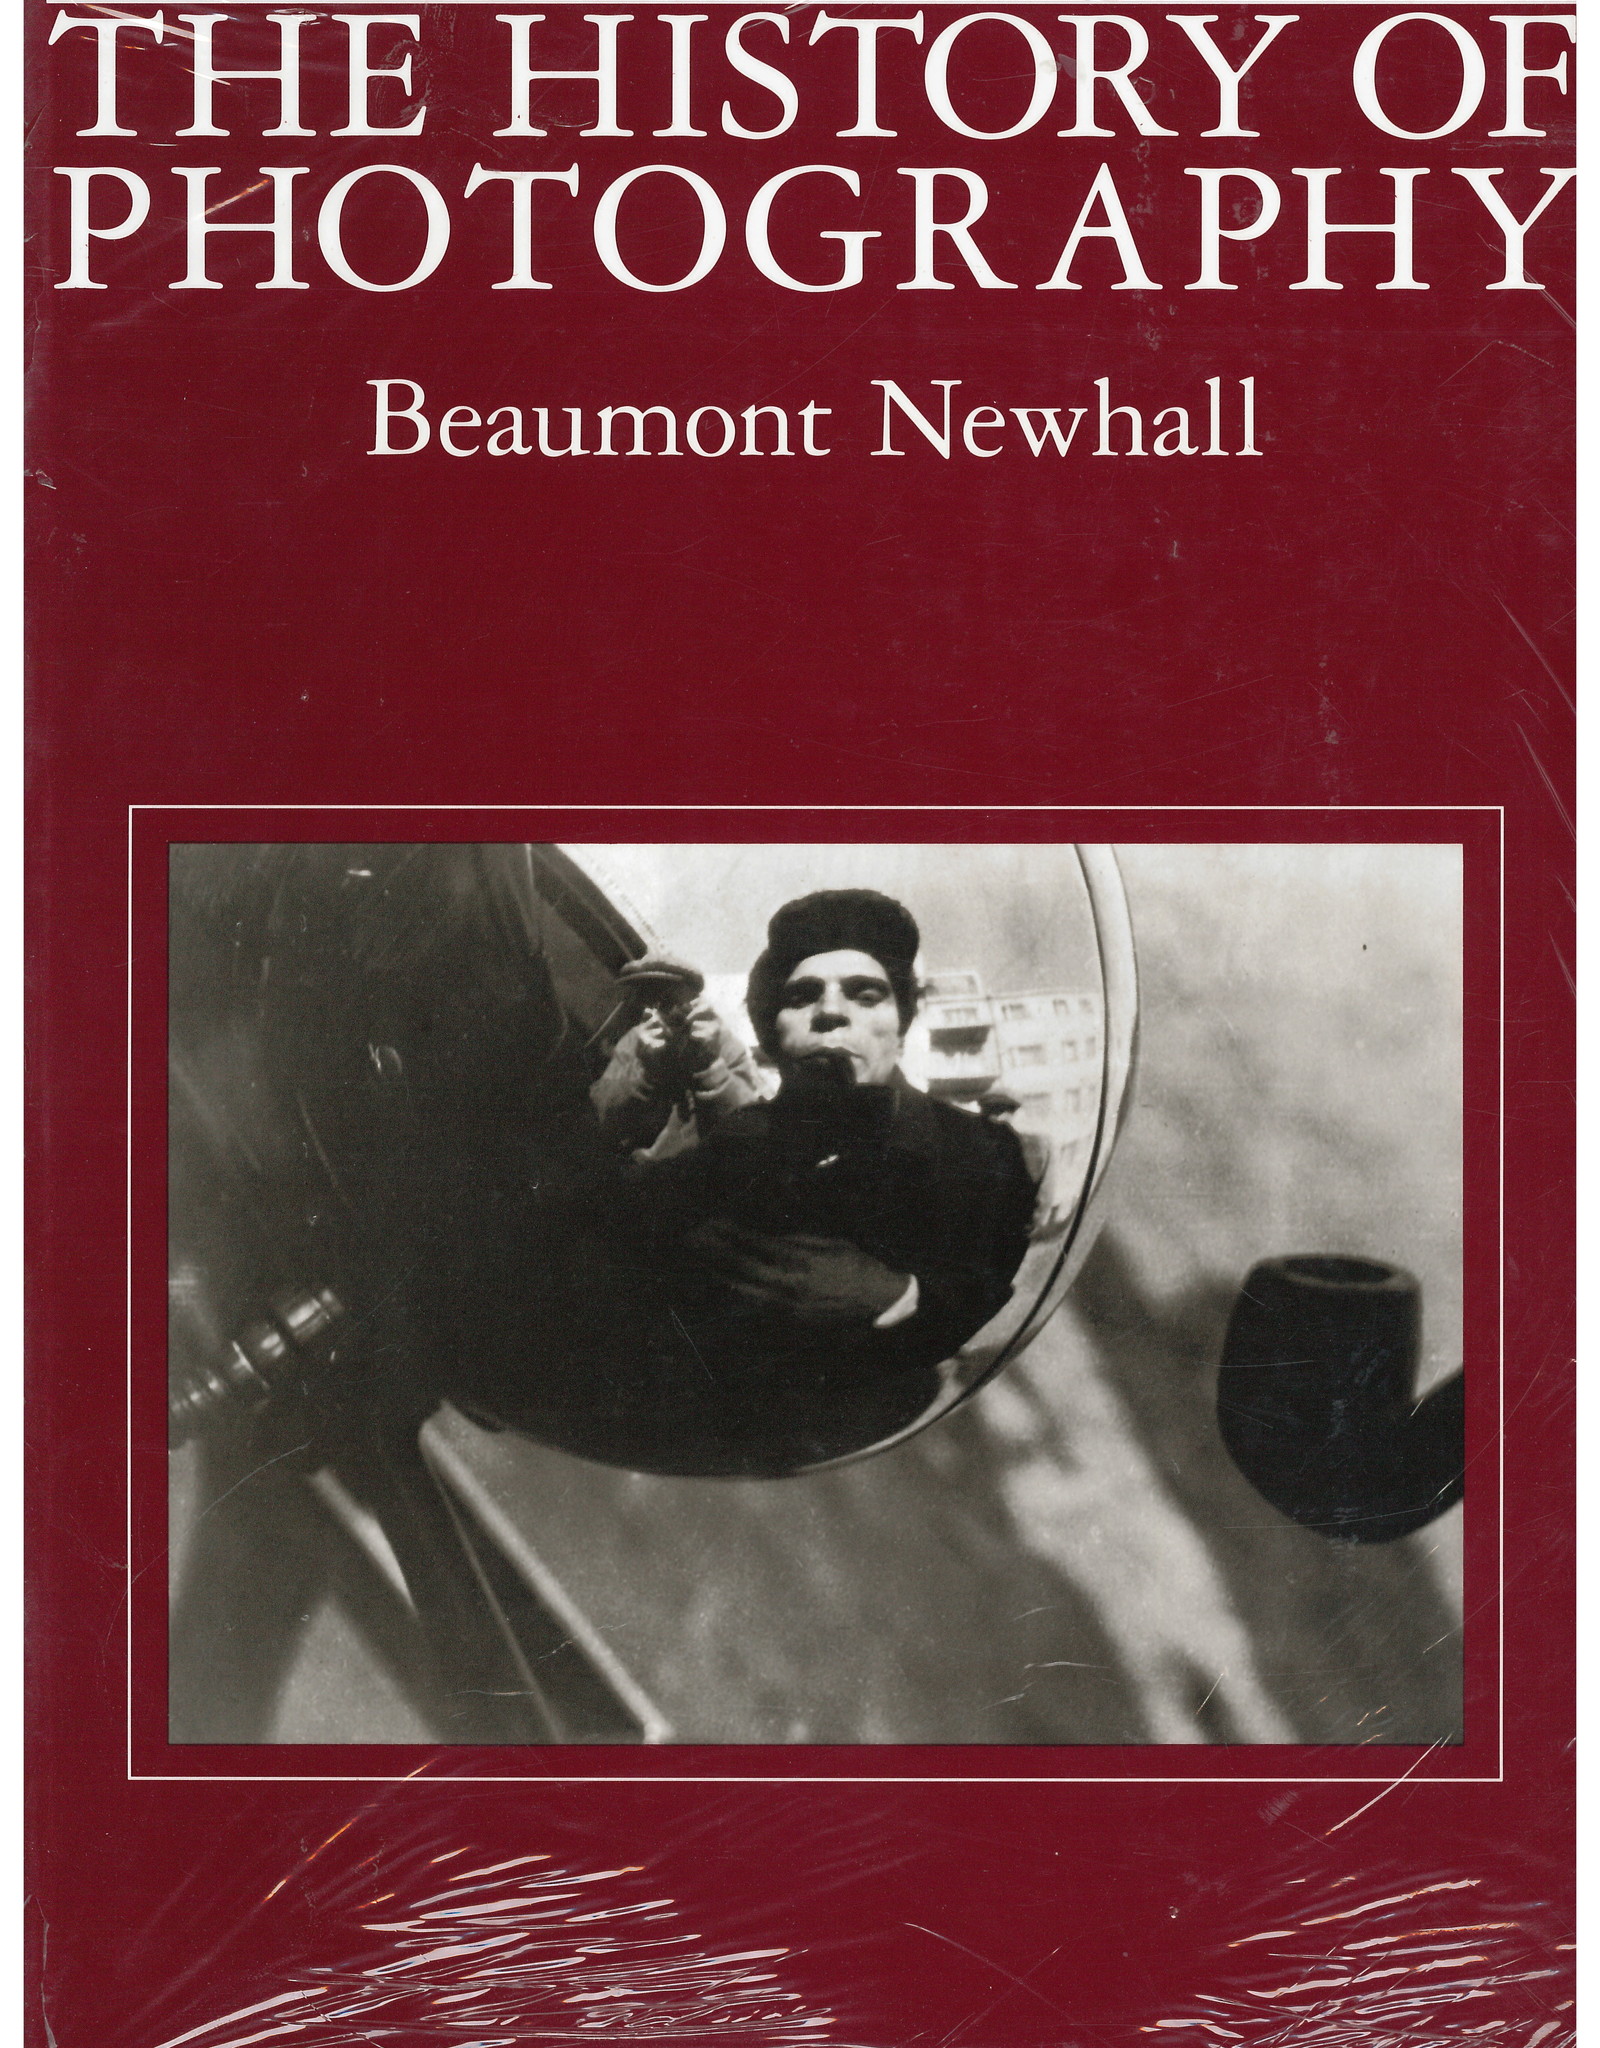 History of Photography: From 1839 to the Present / Beaumont Newhall